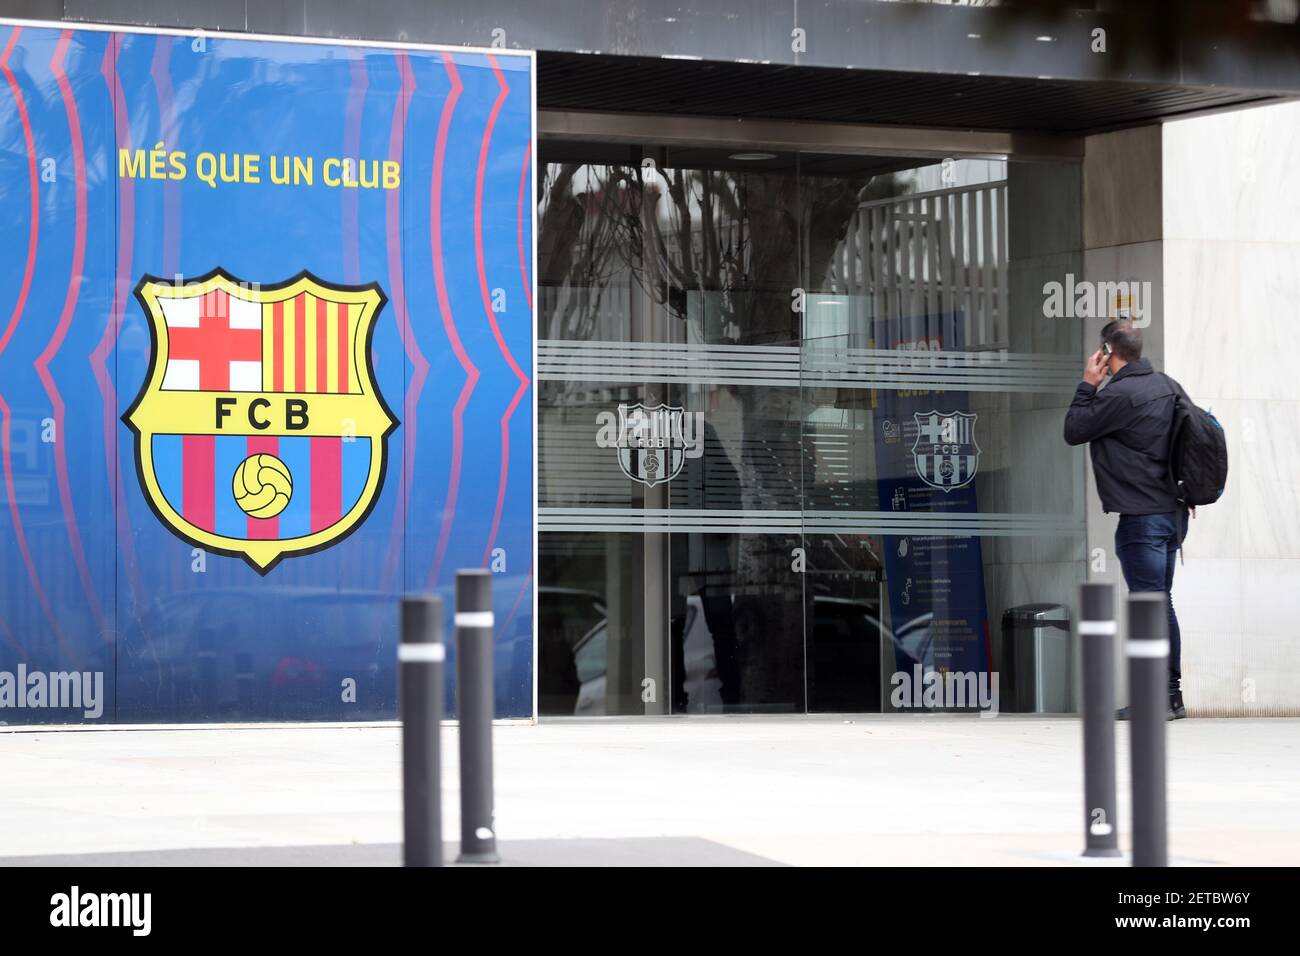 Barcelona, Spain. 1st Mar, 2021. A staff walks into the FC Barcelona's office in Barcelona, Spain, on March 1, 2021. Former FC Barcelona President Josep Maria Bartomeu was arrested on Monday morning along with the club's General Manager, Oscar Gray and the former director to the Presidency, Jayme Masferrer as part of an investigation into a corruption scandal. Credit: Joan Gosa/Xinhua/Alamy Live News Stock Photo